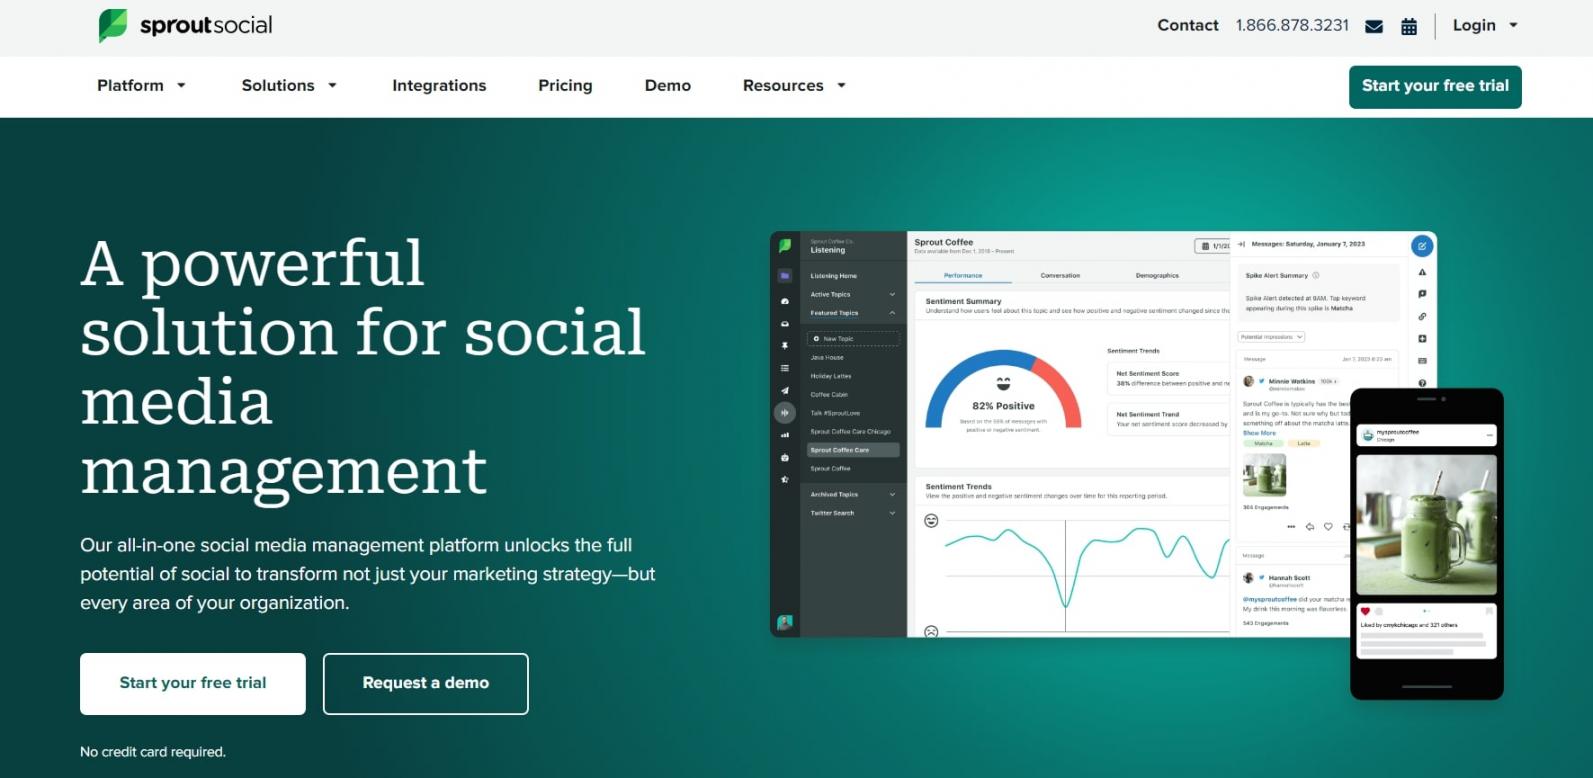 Sprout social - homepage